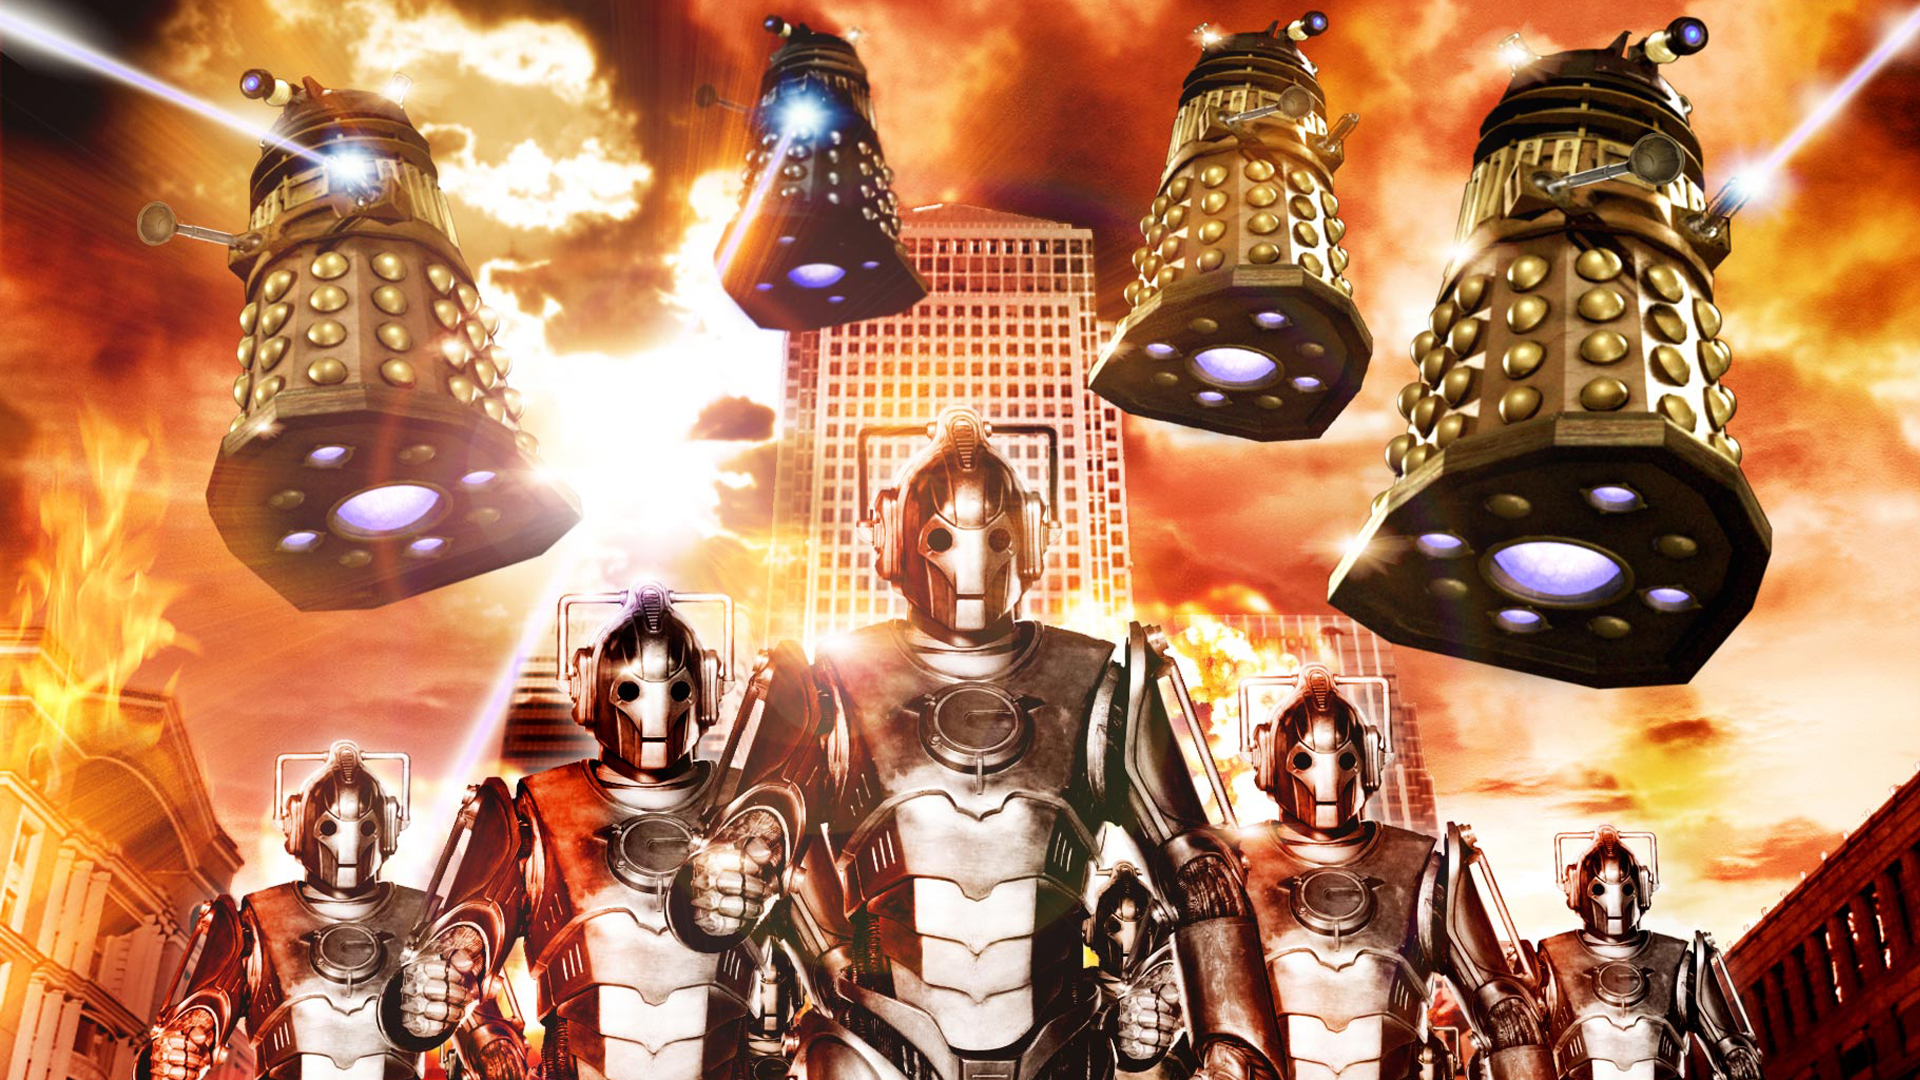 Doctor Who villains, Dalek and Cyberman, facing off in this HD desktop wallpaper.